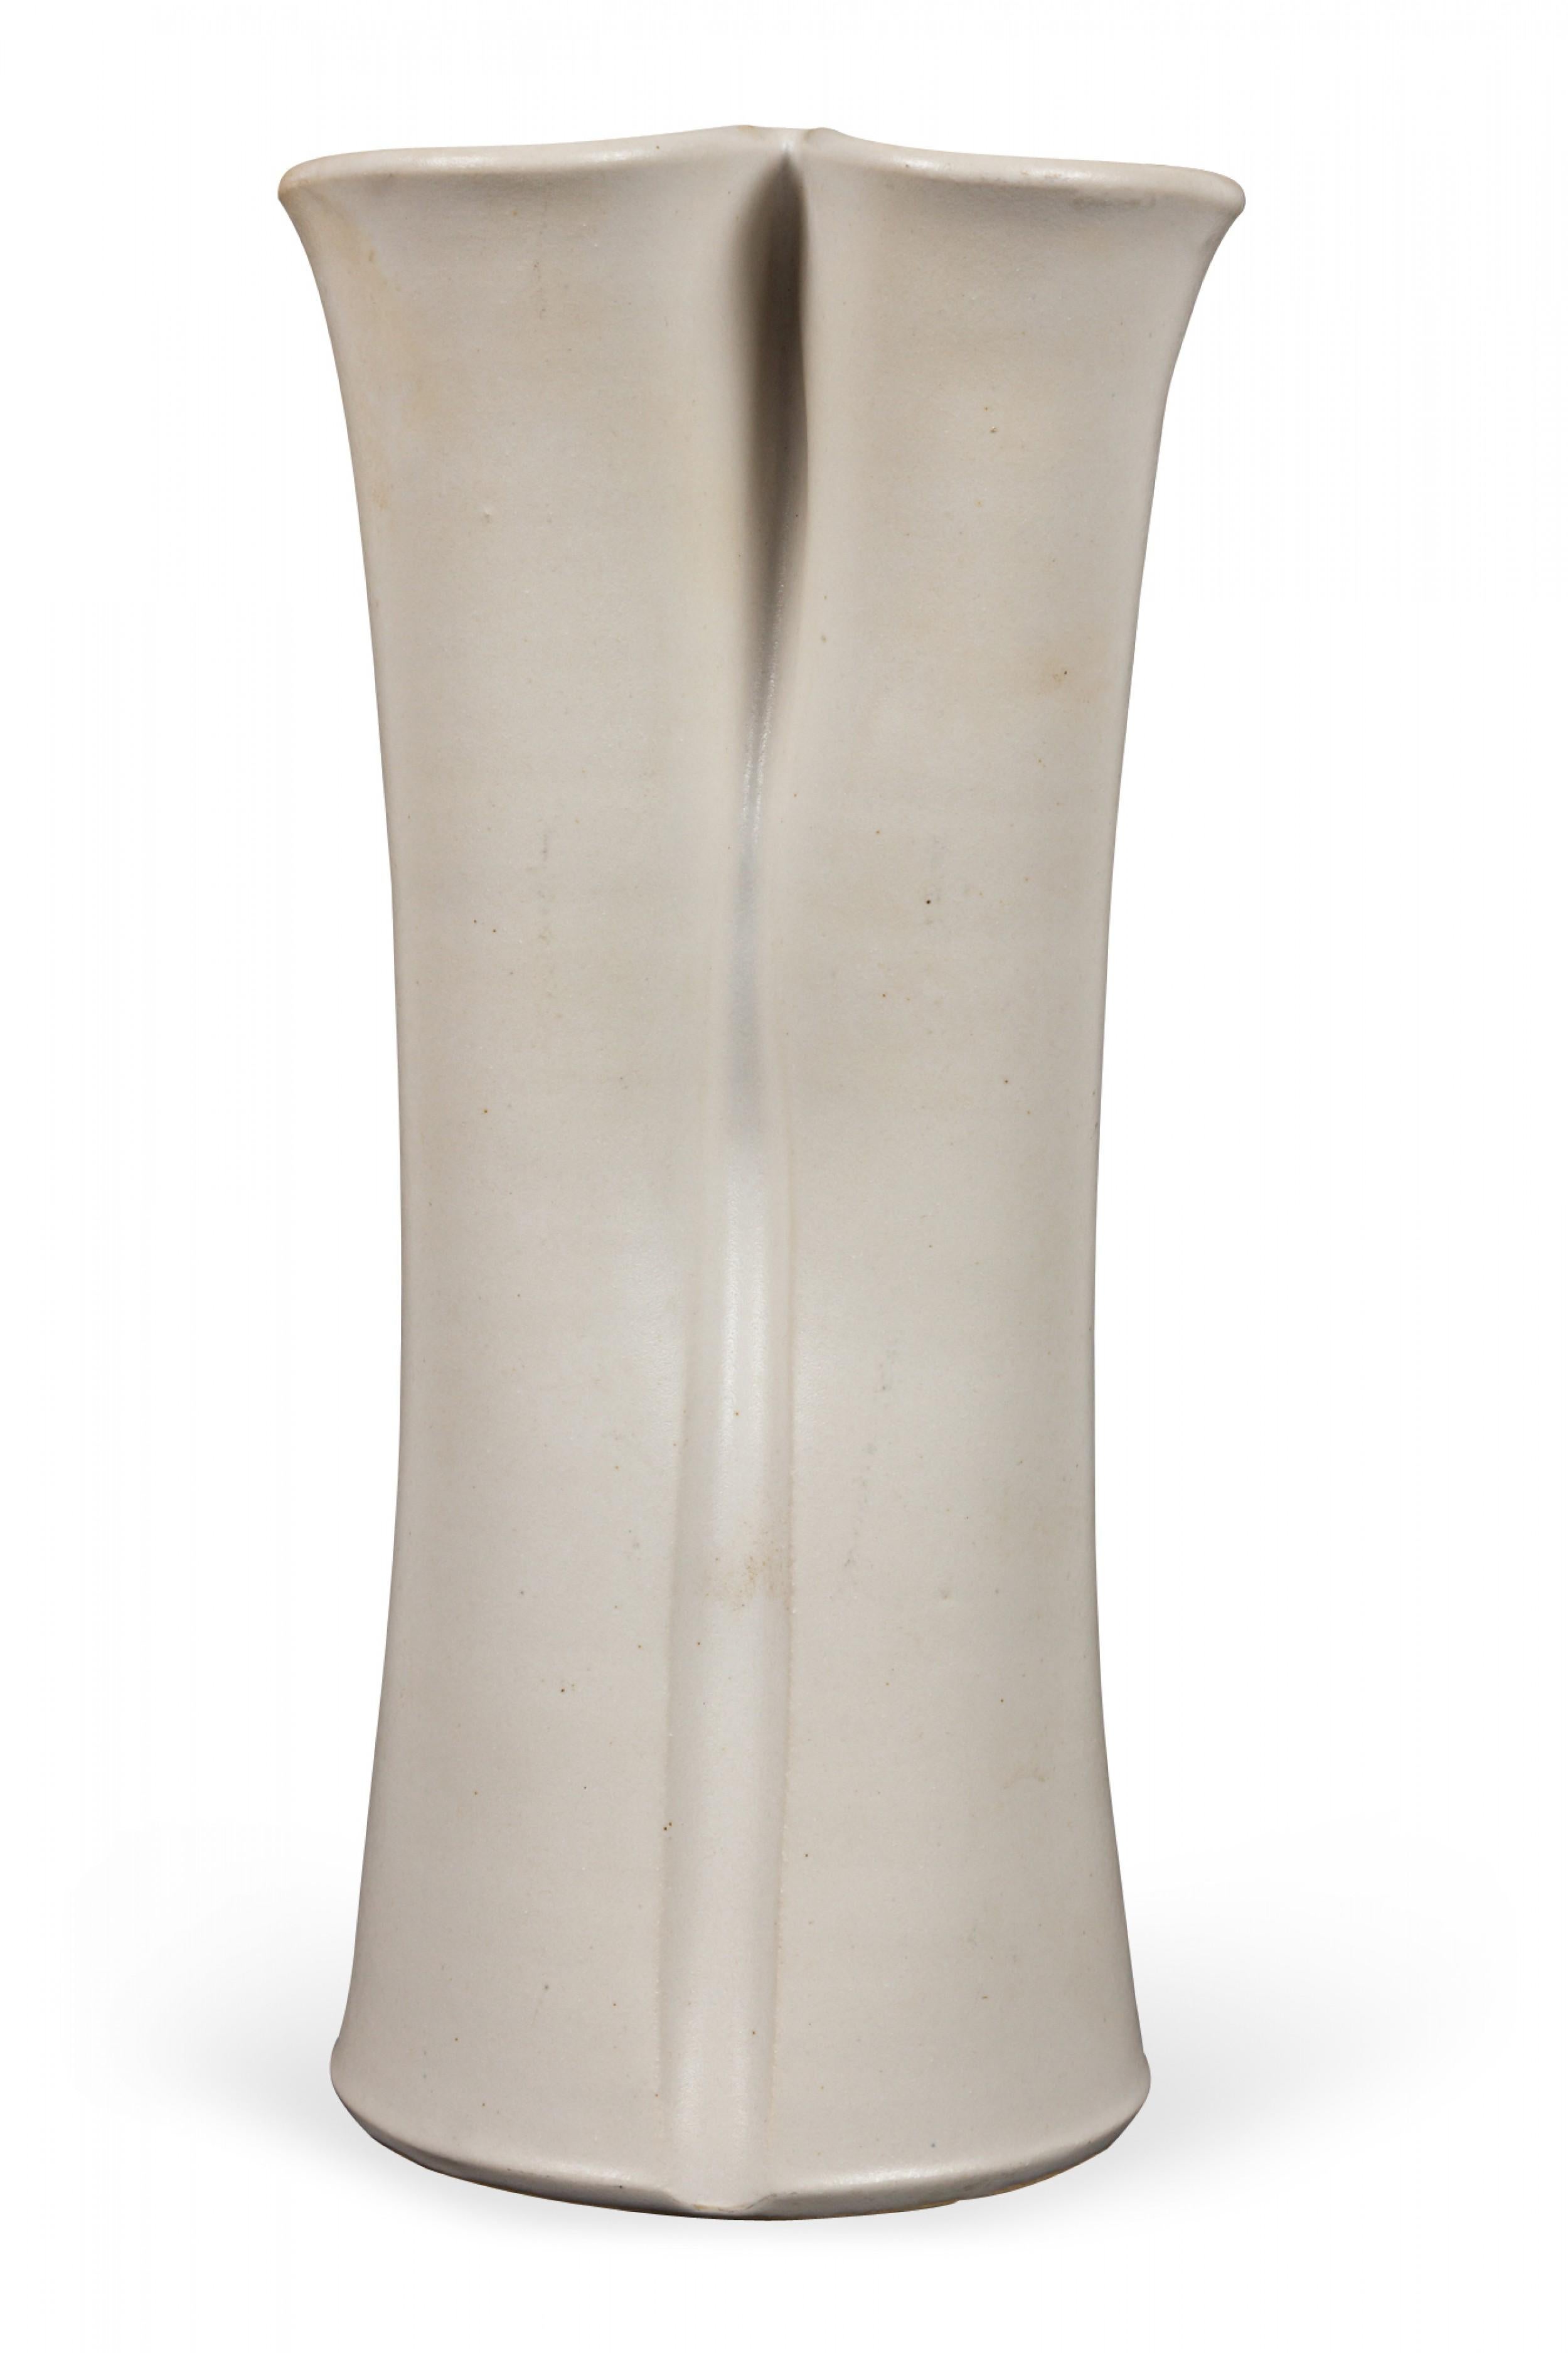 Danish mid-century white porcelain vase with an organic lobed and flared form. (label on side and signature on bottom, AAGE WÜRTZ 303).